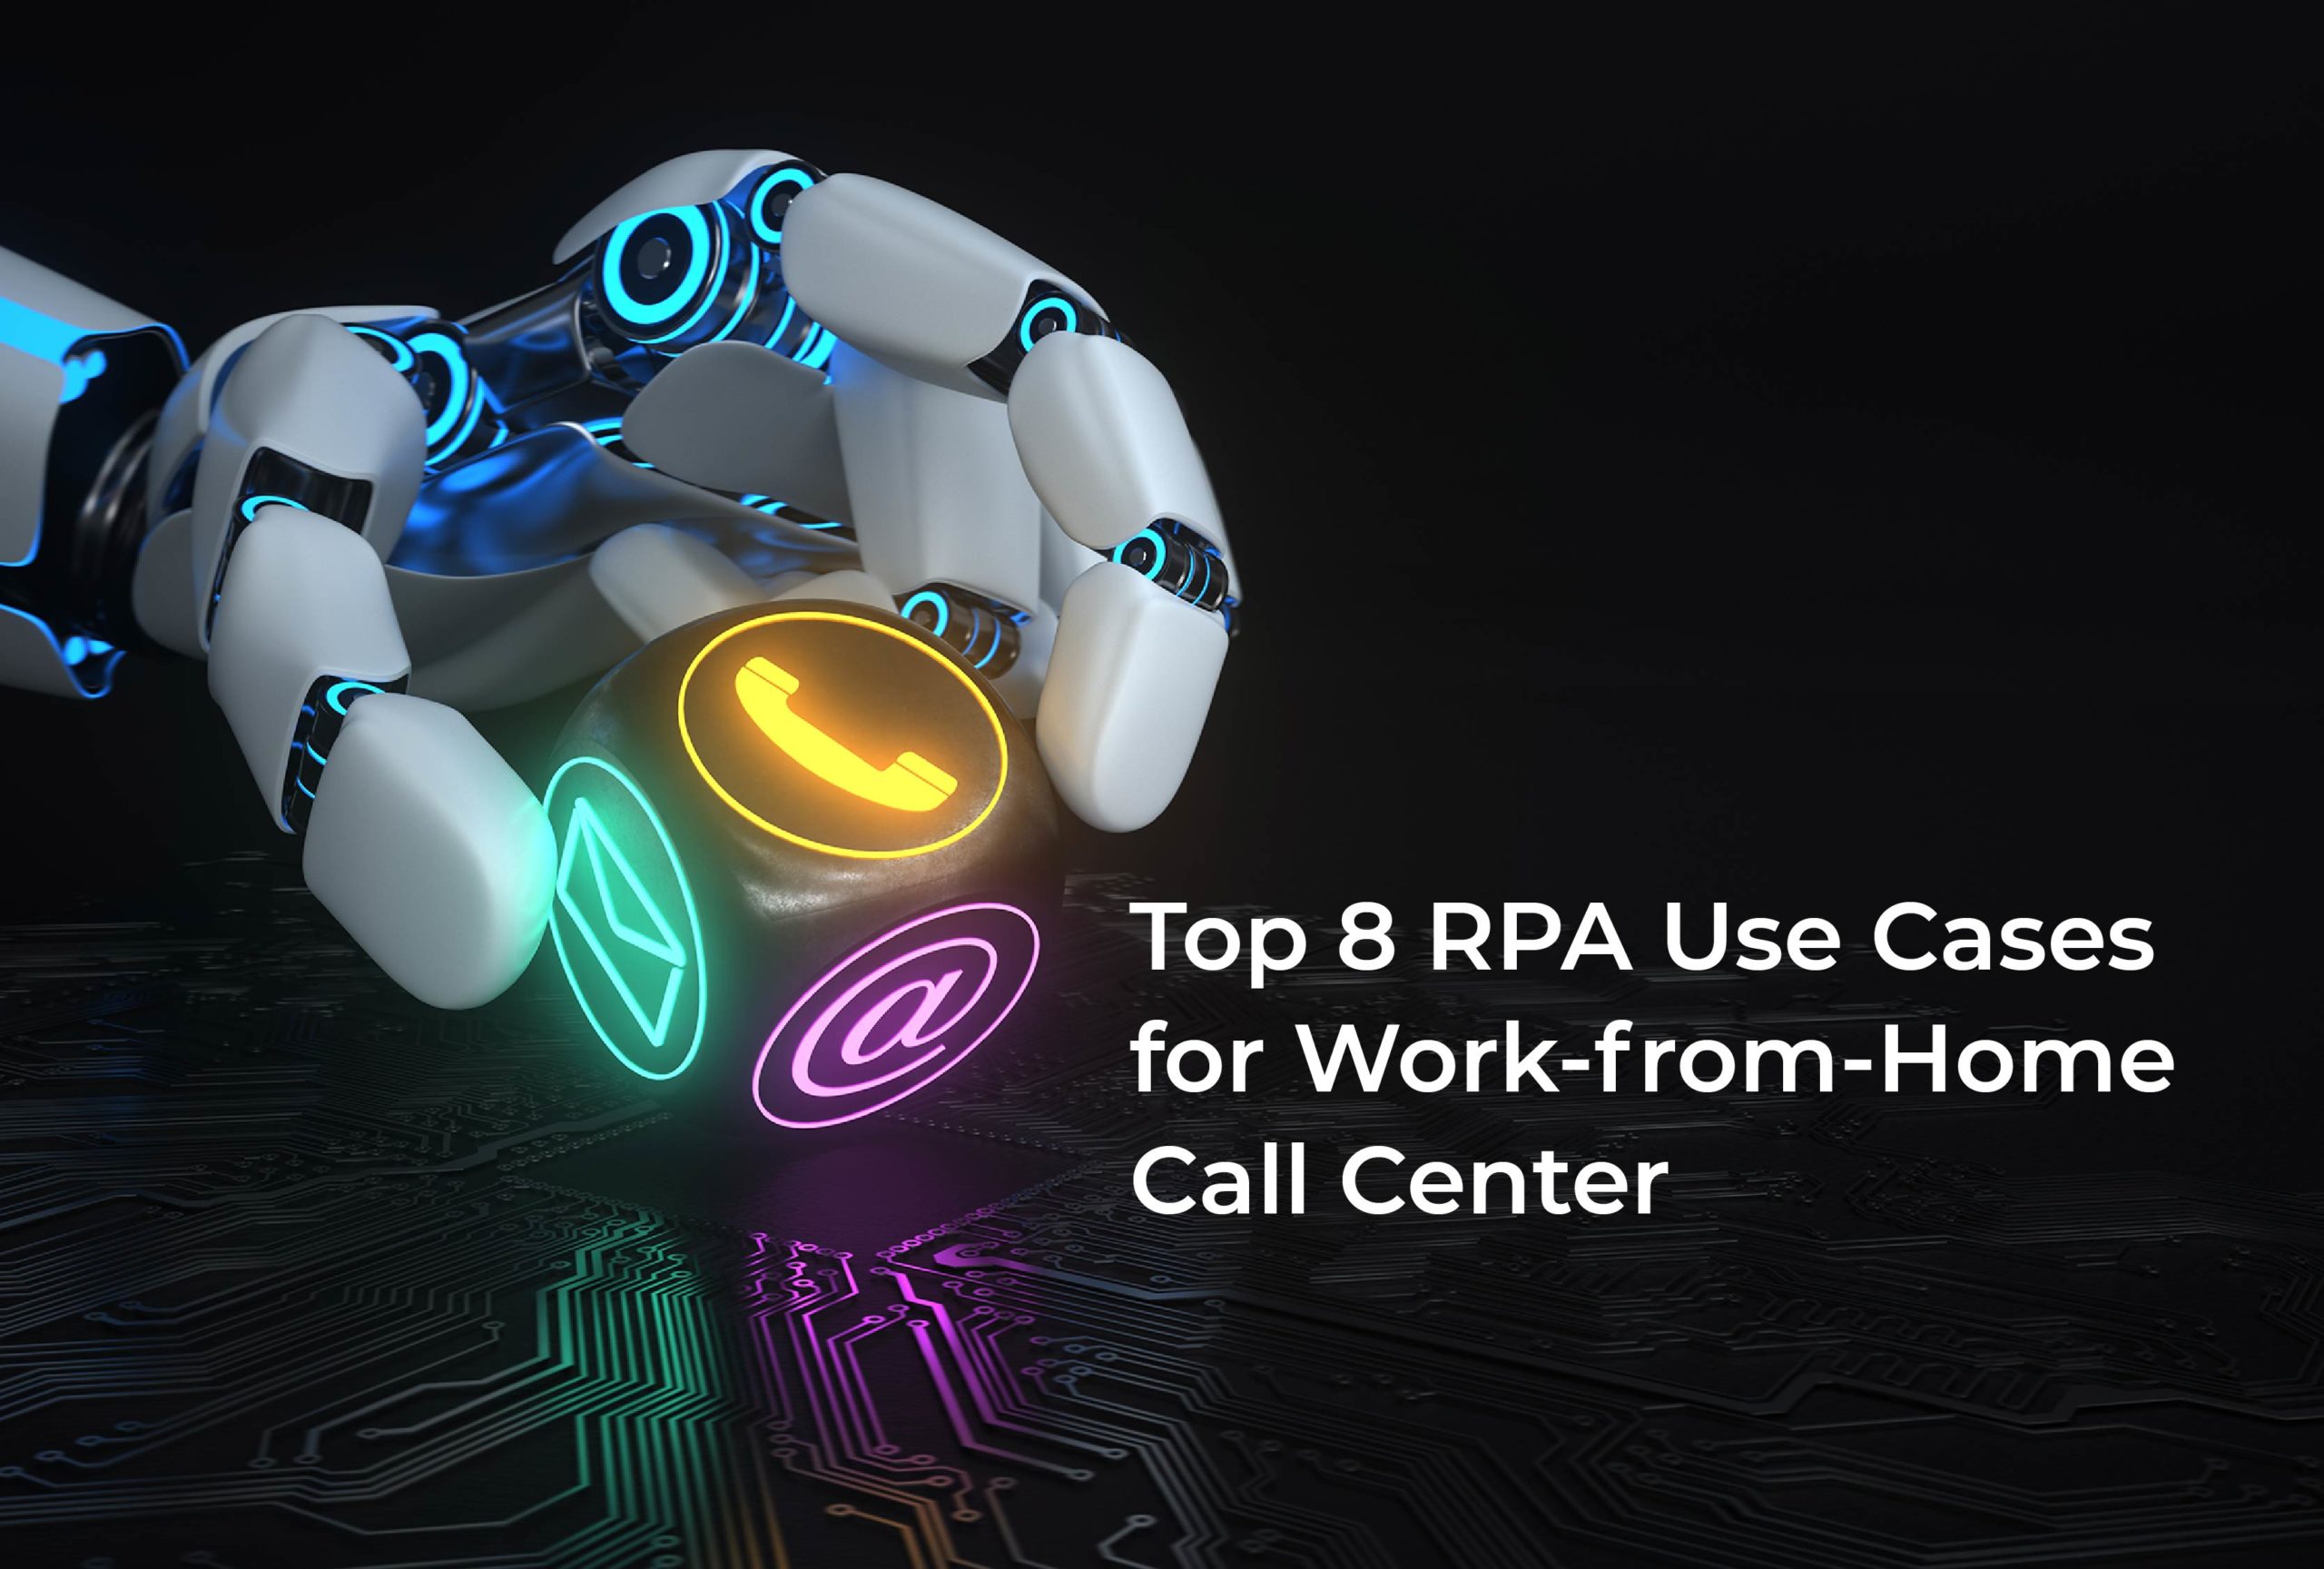 Top 8 RPA Use Cases for Work-from-Home Call Center